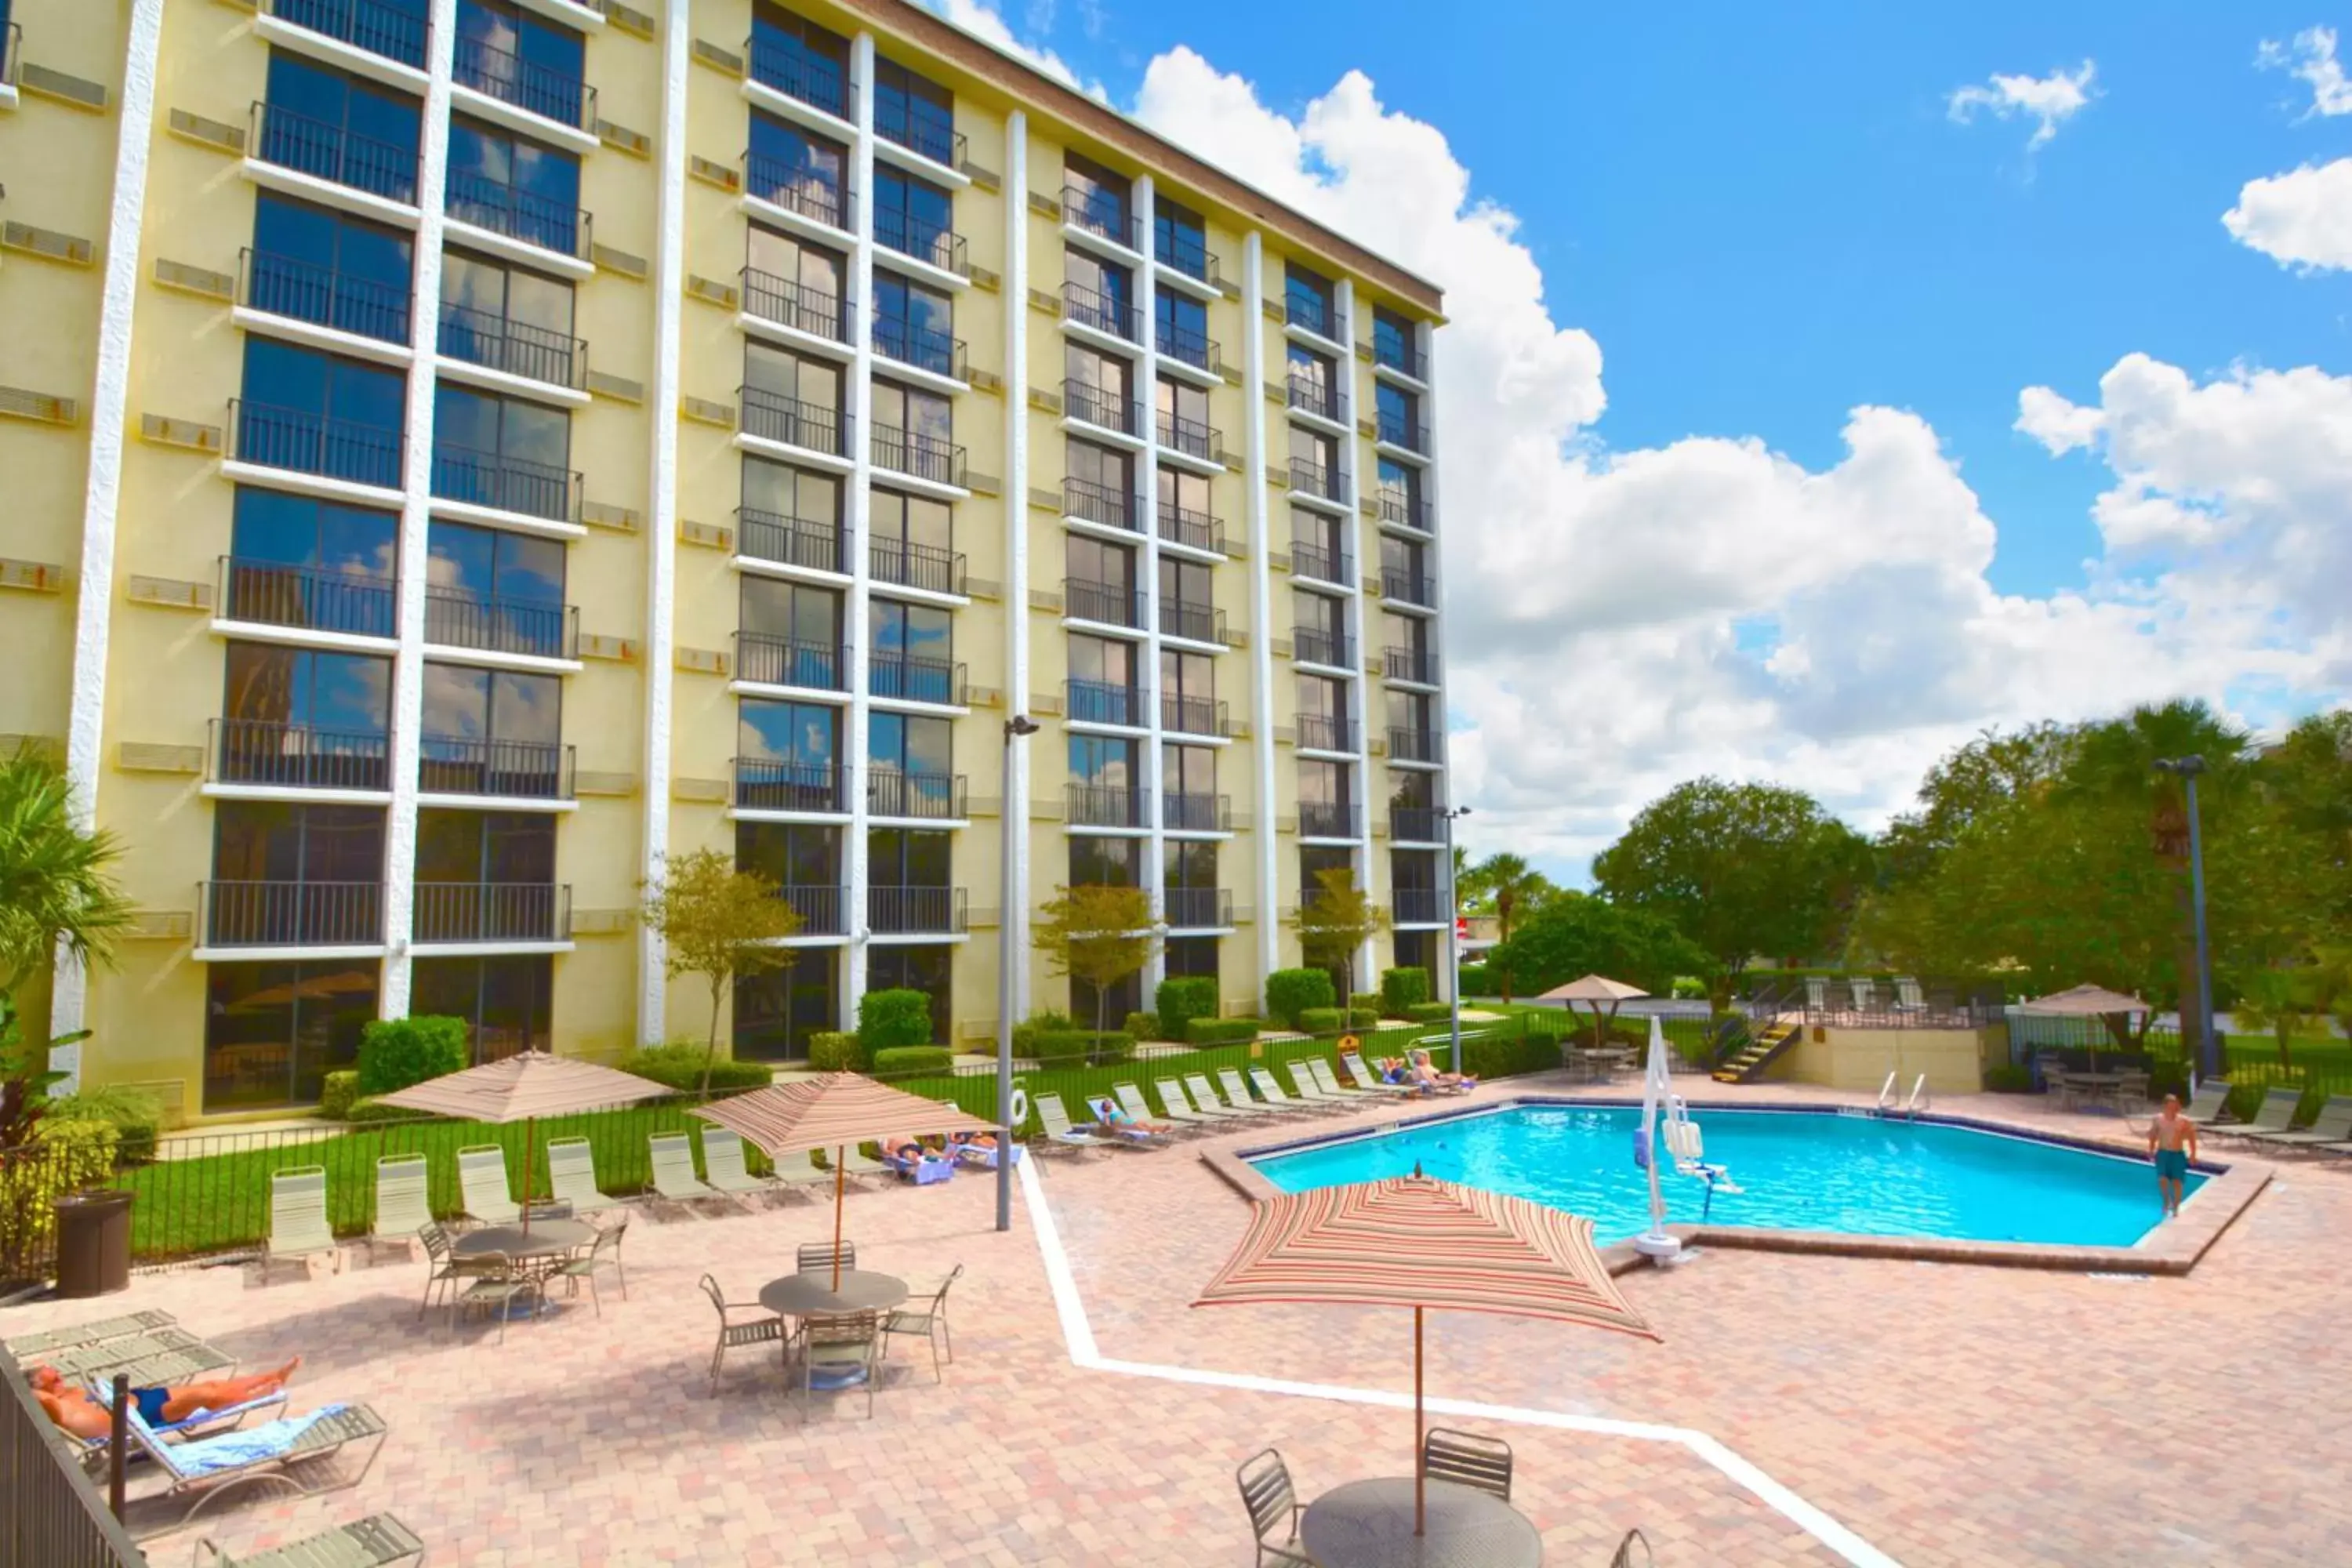 Property building, Swimming Pool in Rosen Inn Closest to Universal